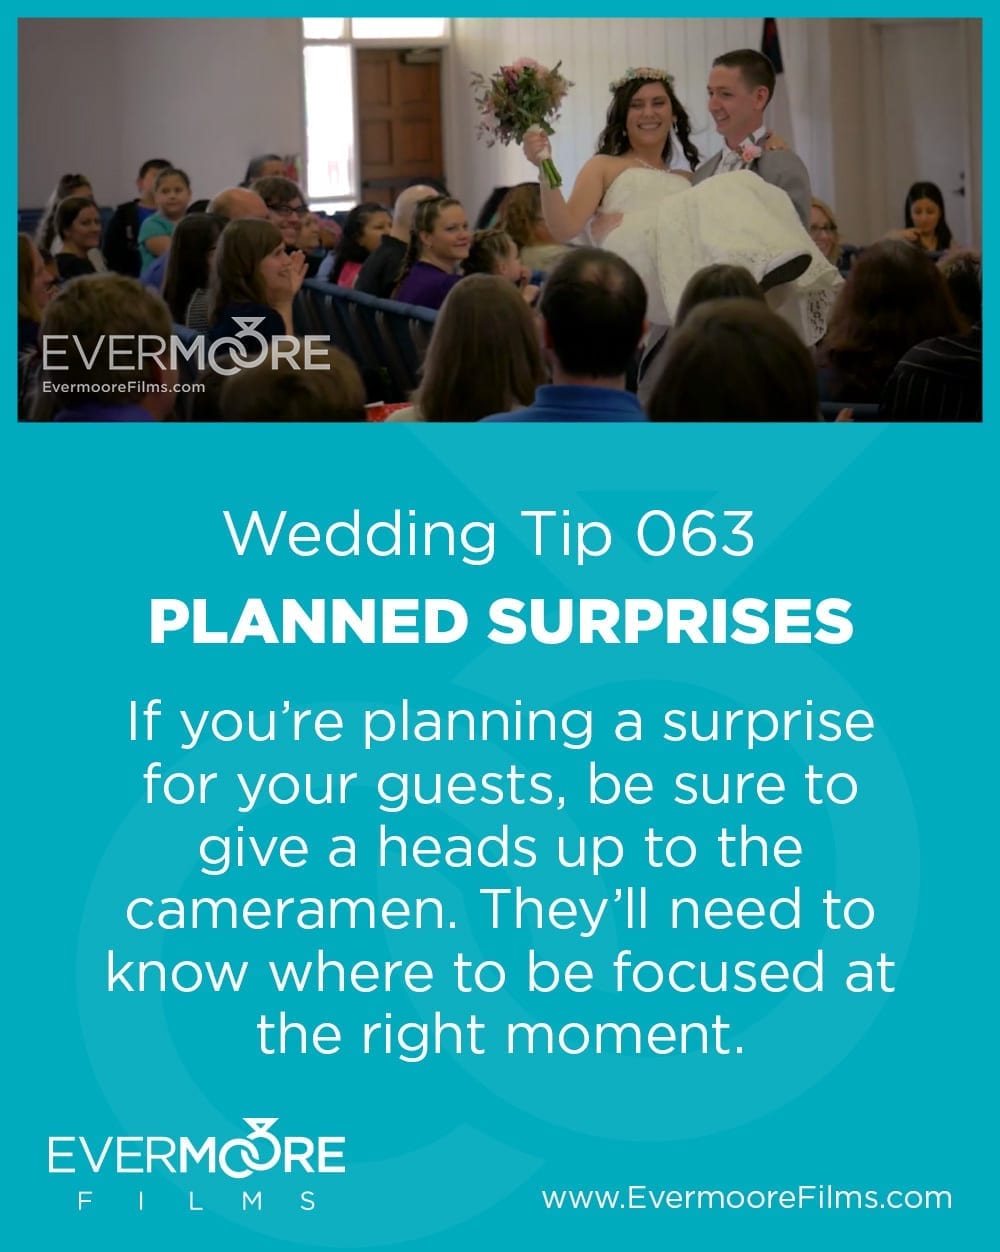 Planned Surprises | Wedding Tip 065 | Evermoore Films | Why not involve the whole bridal party in a surprise, choreographed dance for your guests? Right after the Grand Entrance is a perfect time to get the party started!